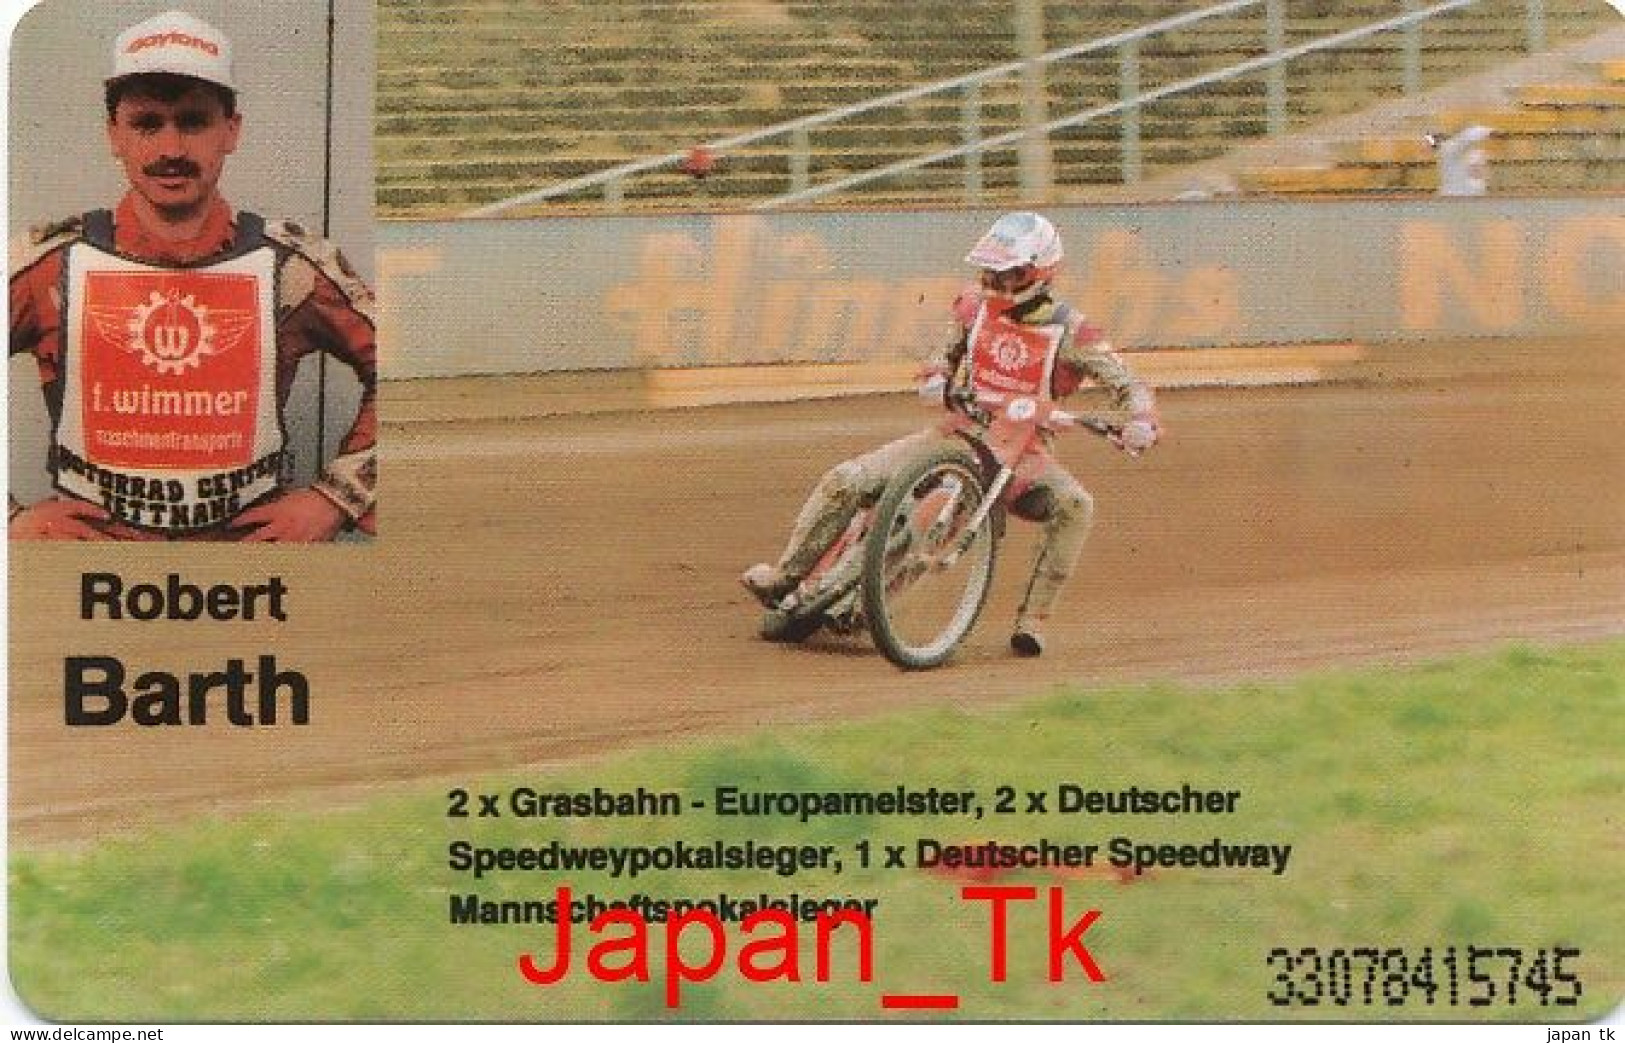 GERMANY O 064 A 93 Motorsport-Club Olching- Aufl  1 600 - Siehe Scan - O-Series : Séries Client